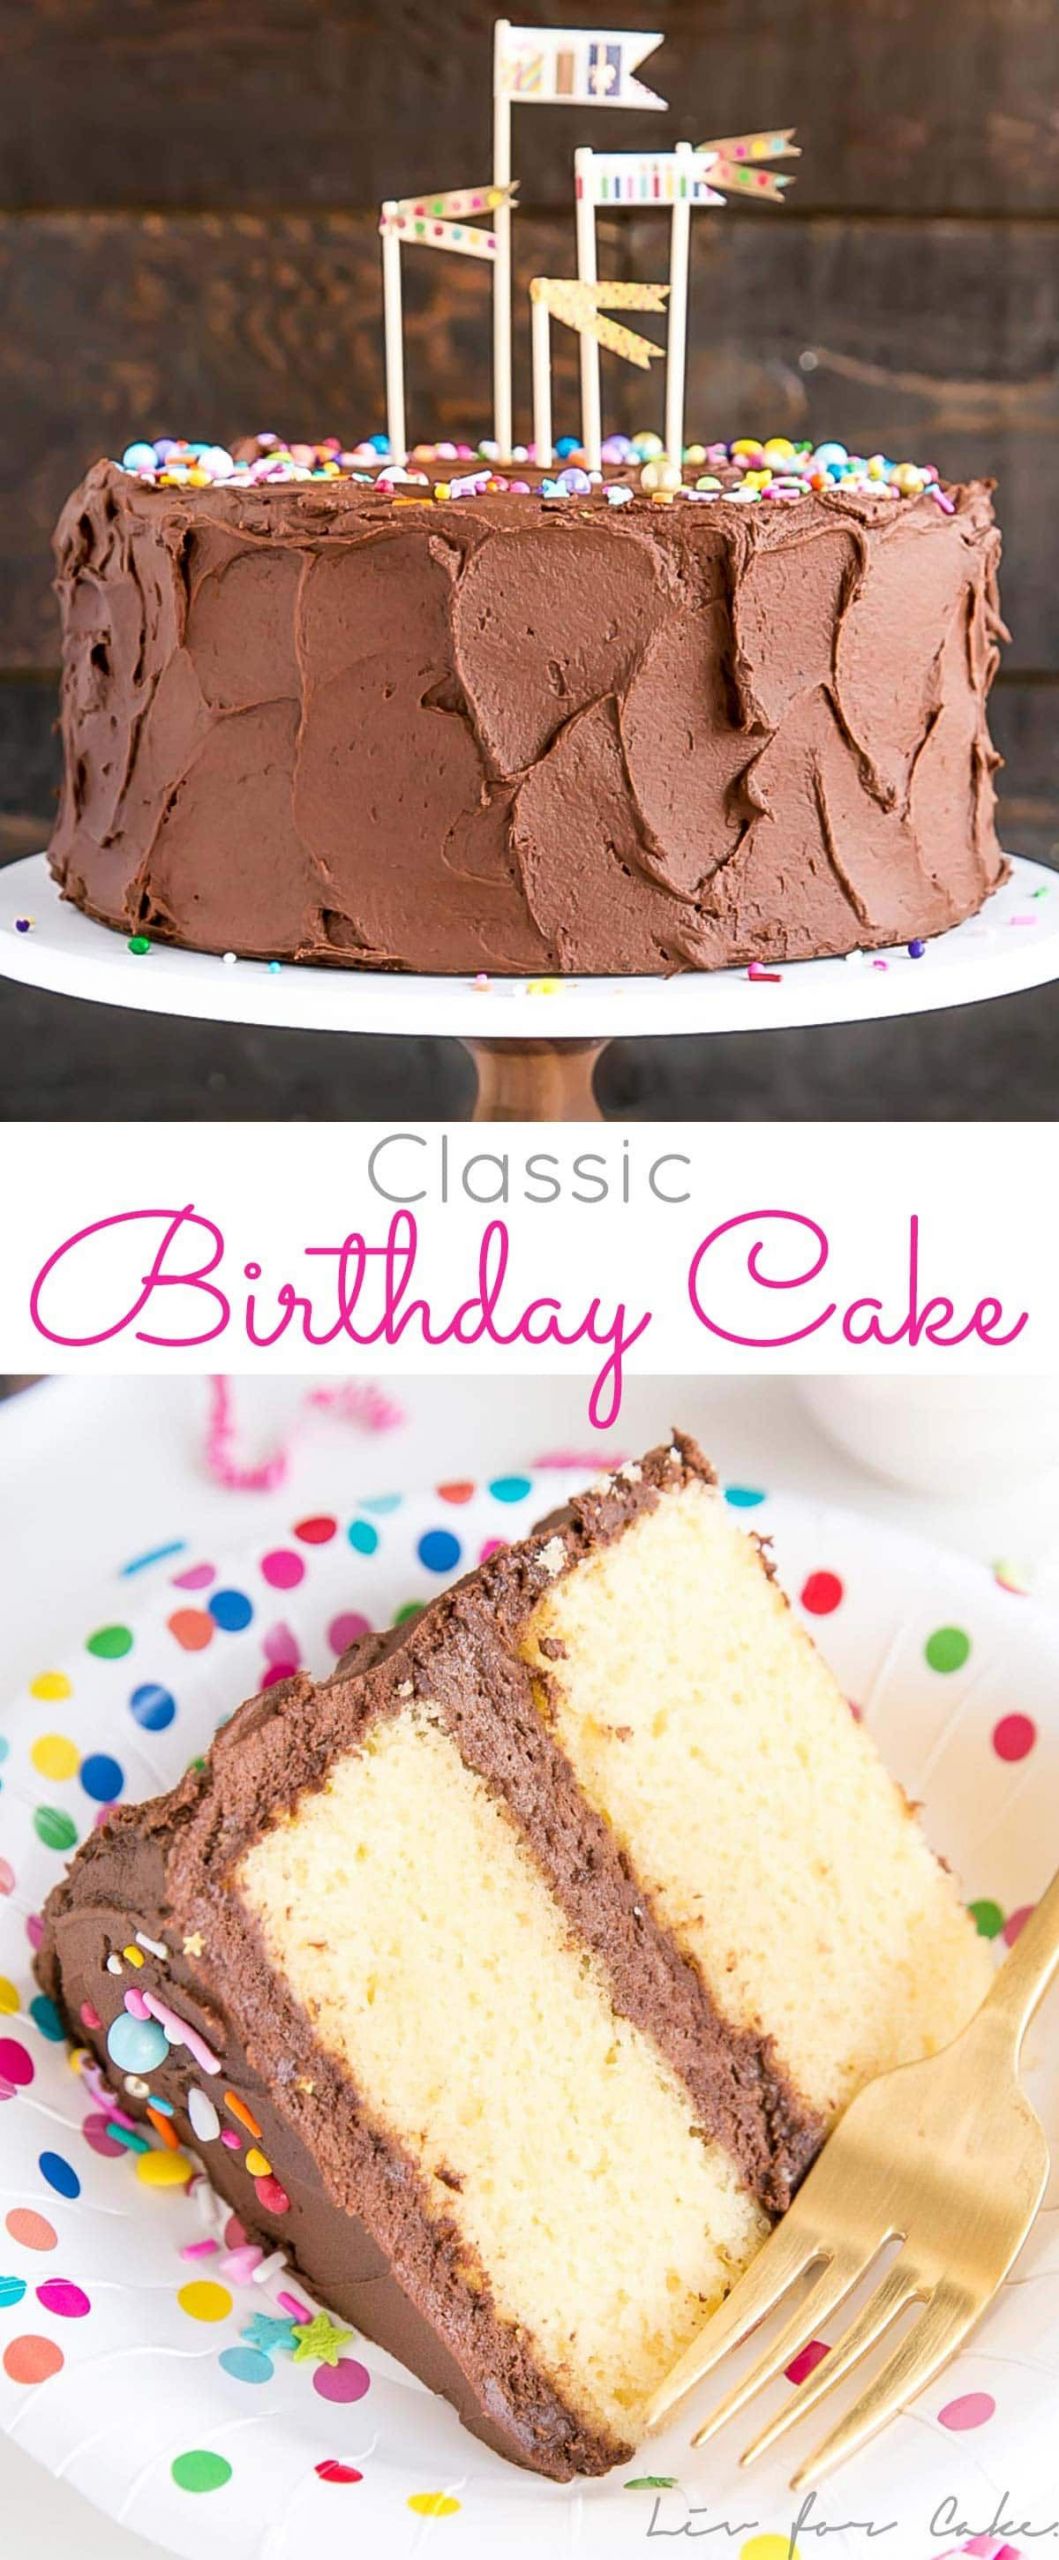 Yellow Birthday Cake Recipe
 The ultimate birthday cake A classic yellow cake with a